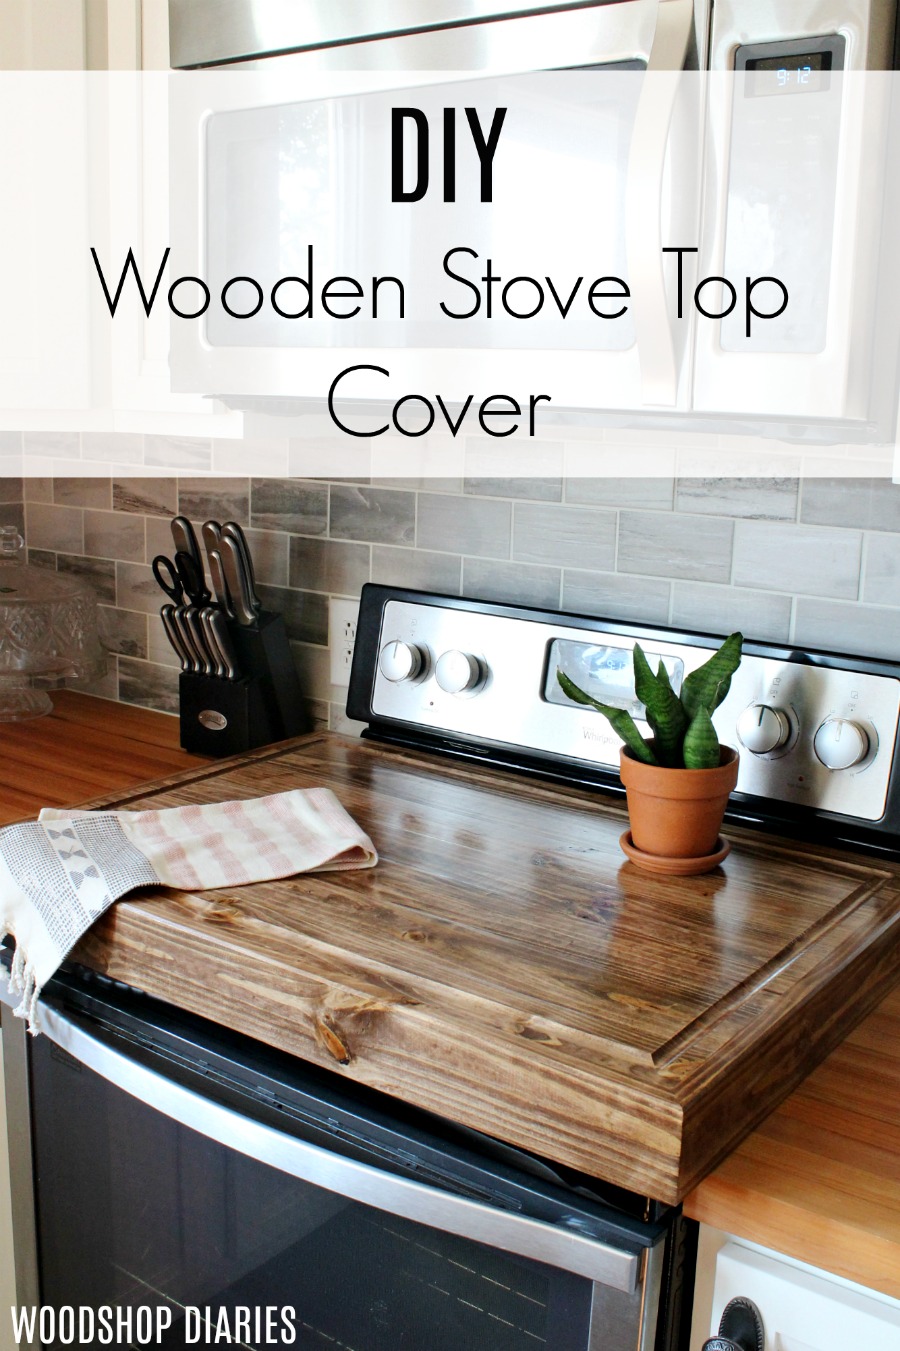  Wood Stove Top Cover Board, Noodle Board Stove Cover for Gas  Stove and Electric Stove, Wooden Stovetop Cover Cutting Board for Counter  Space : Home & Kitchen